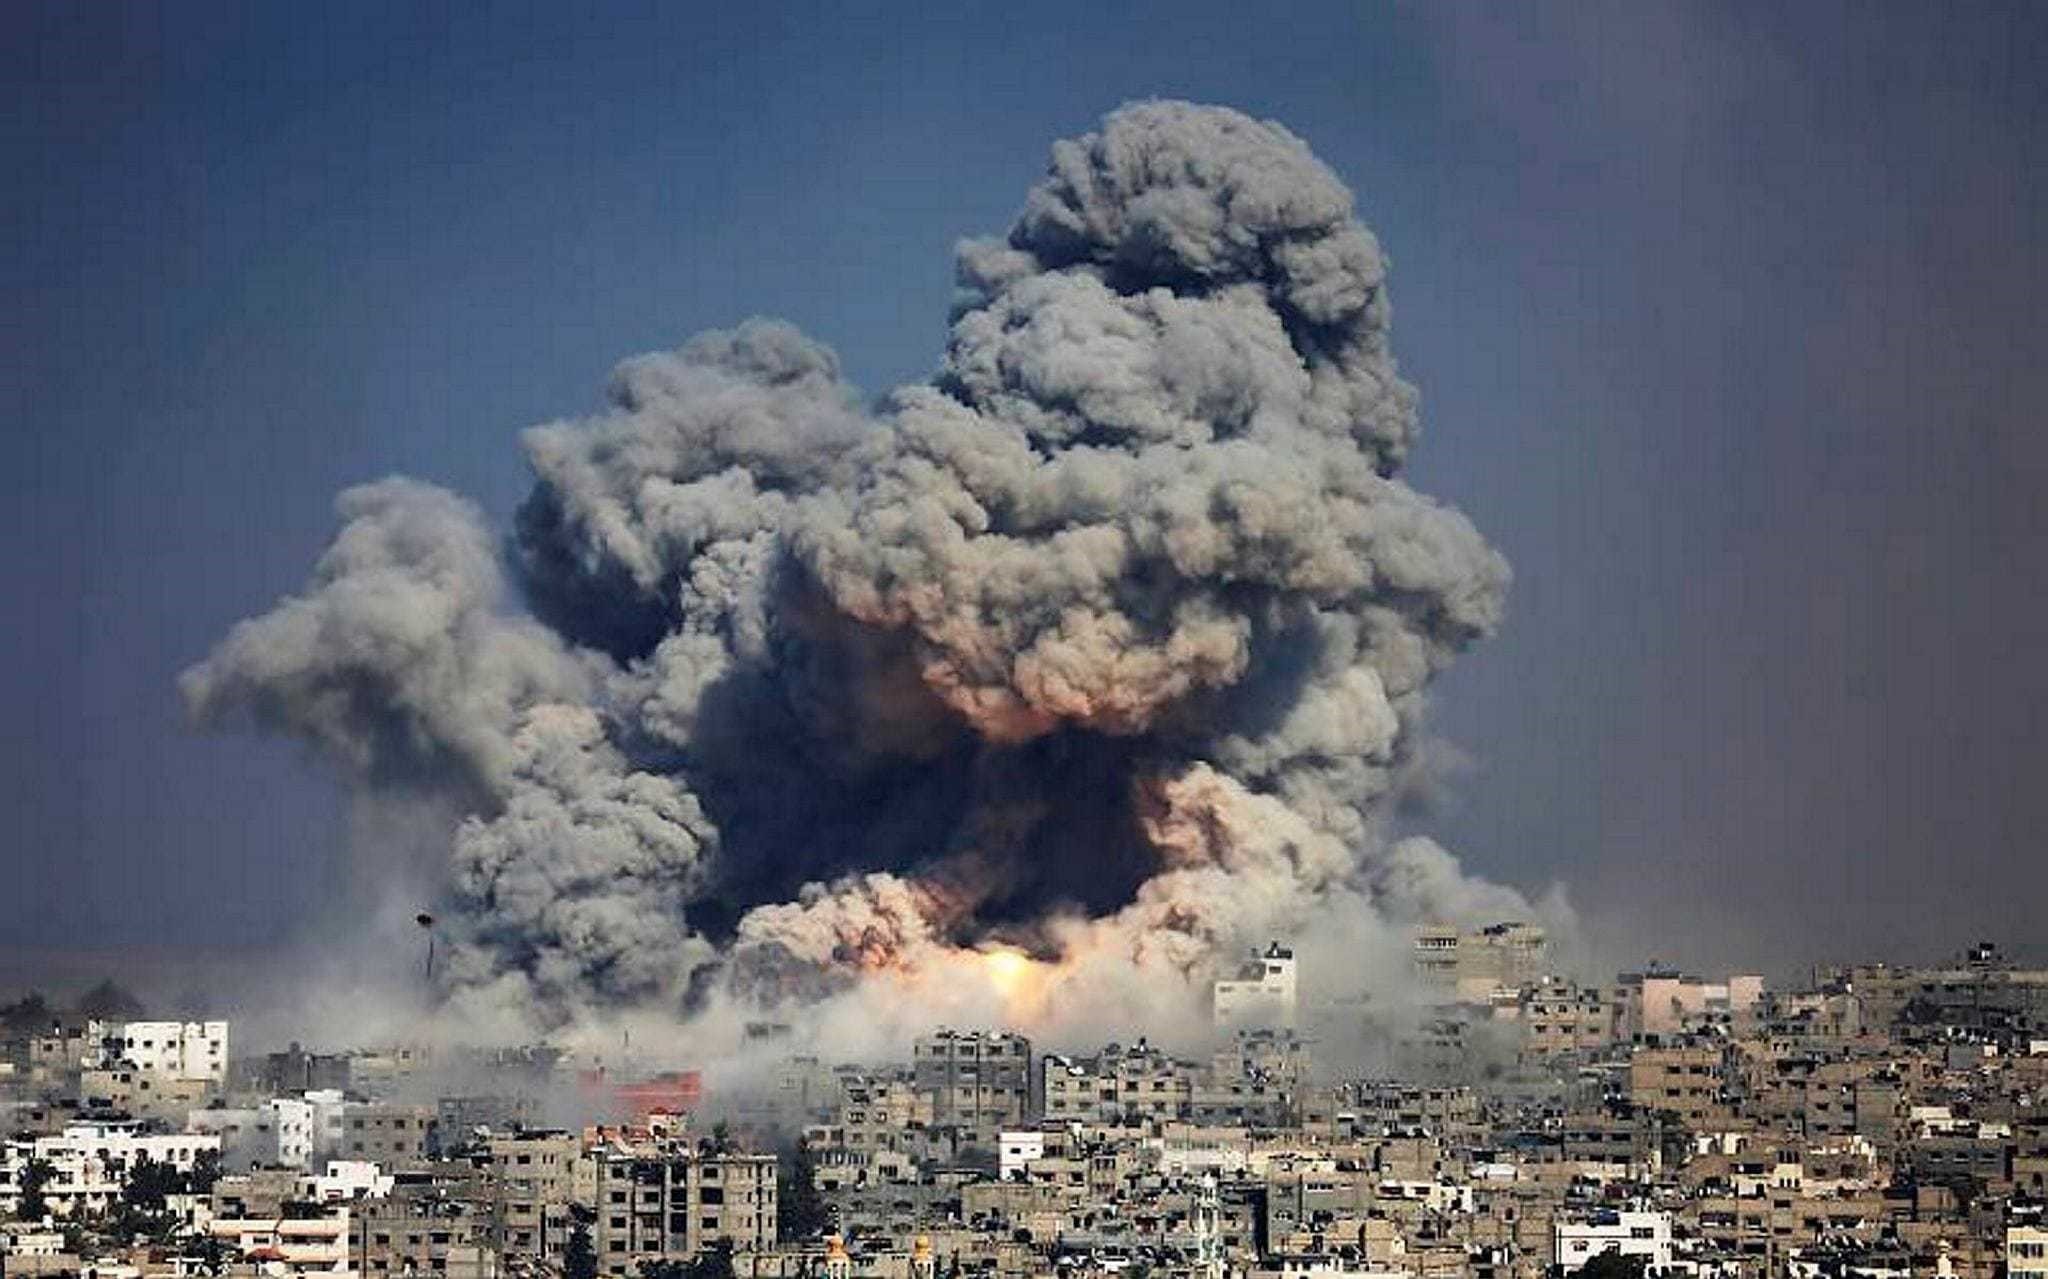 Smoke and fire from an Israeli strike rose over Gaza City on July 29, 2014.